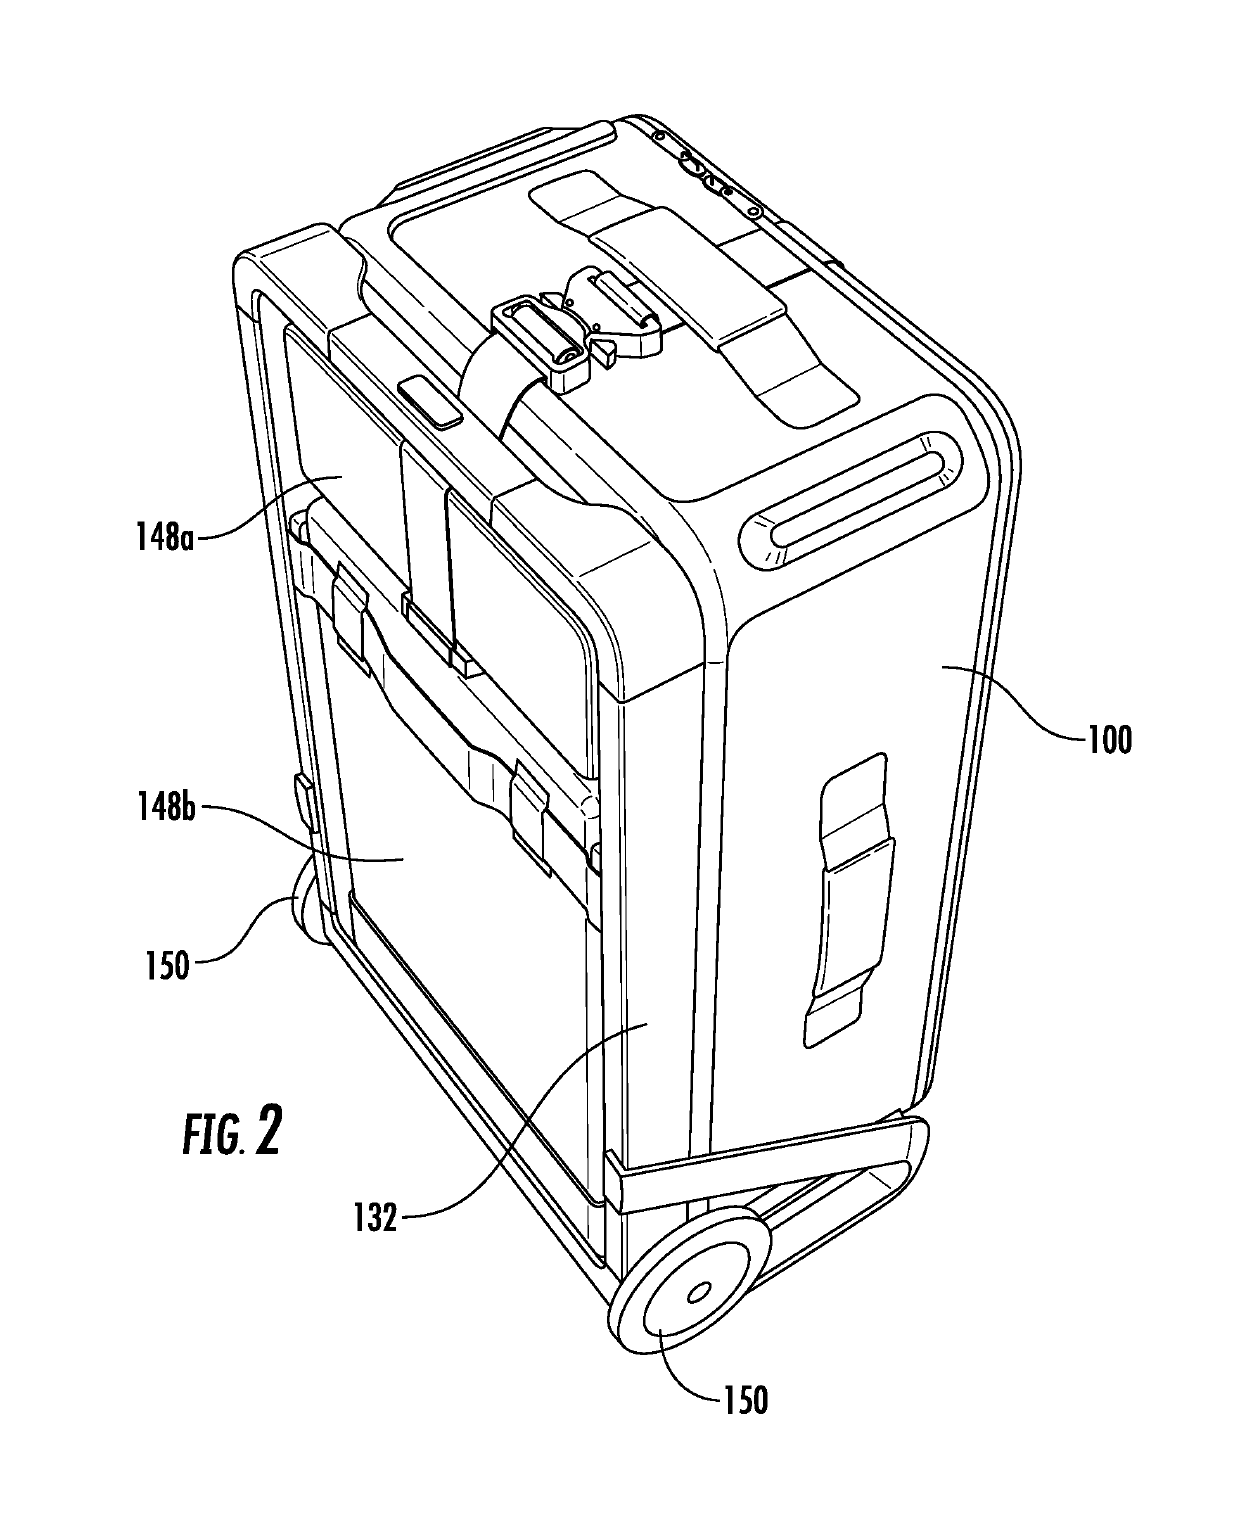 External frame luggage with fold-out computer case